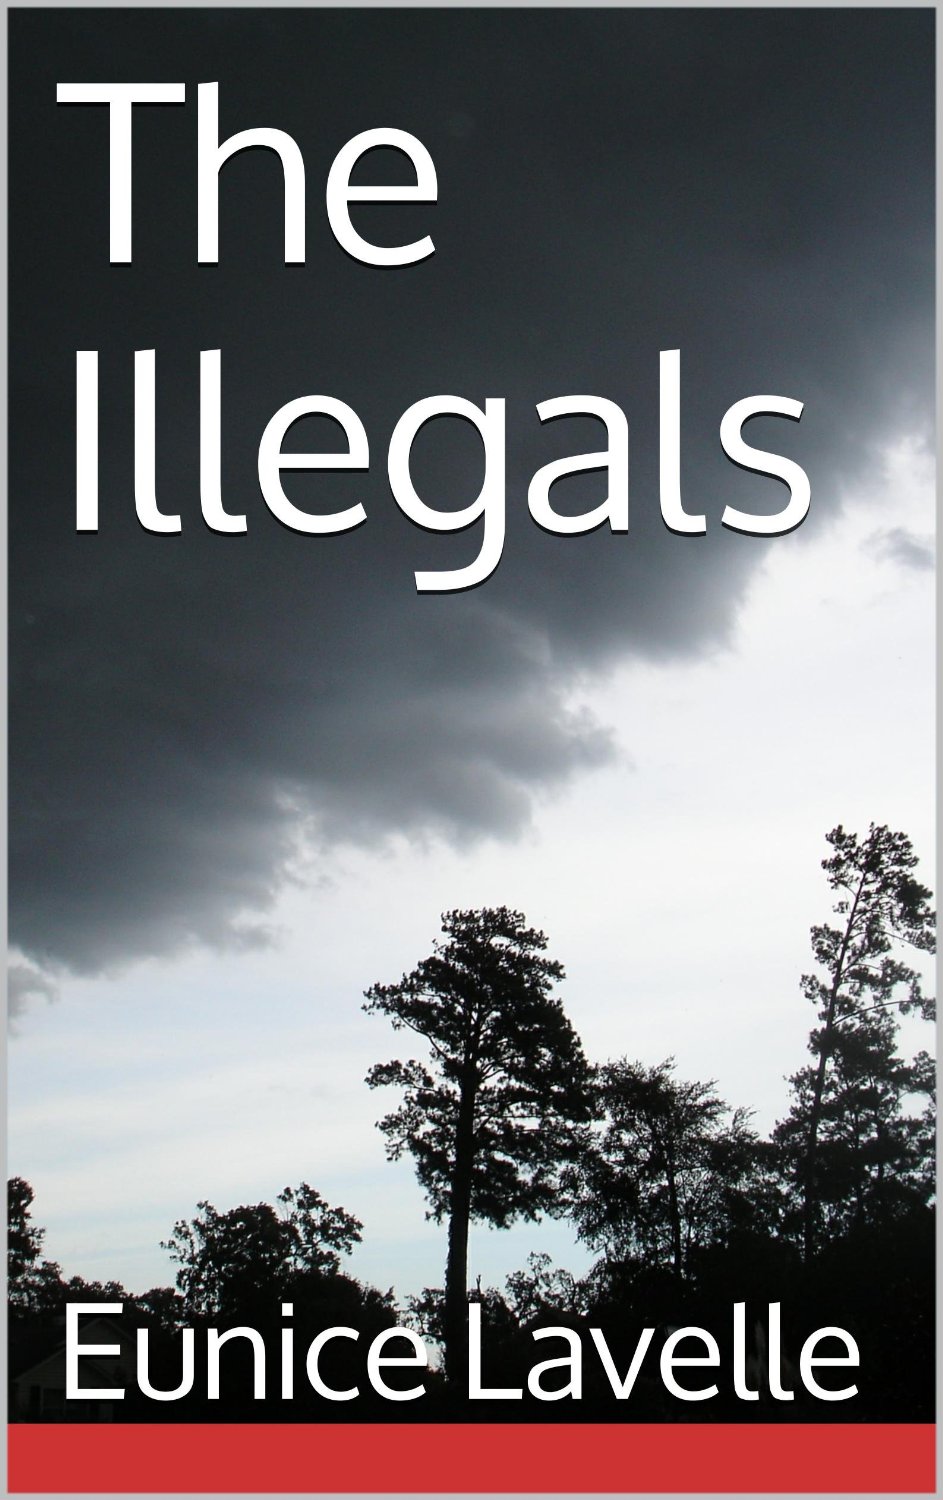 The Illegals by Eunice Lavelle